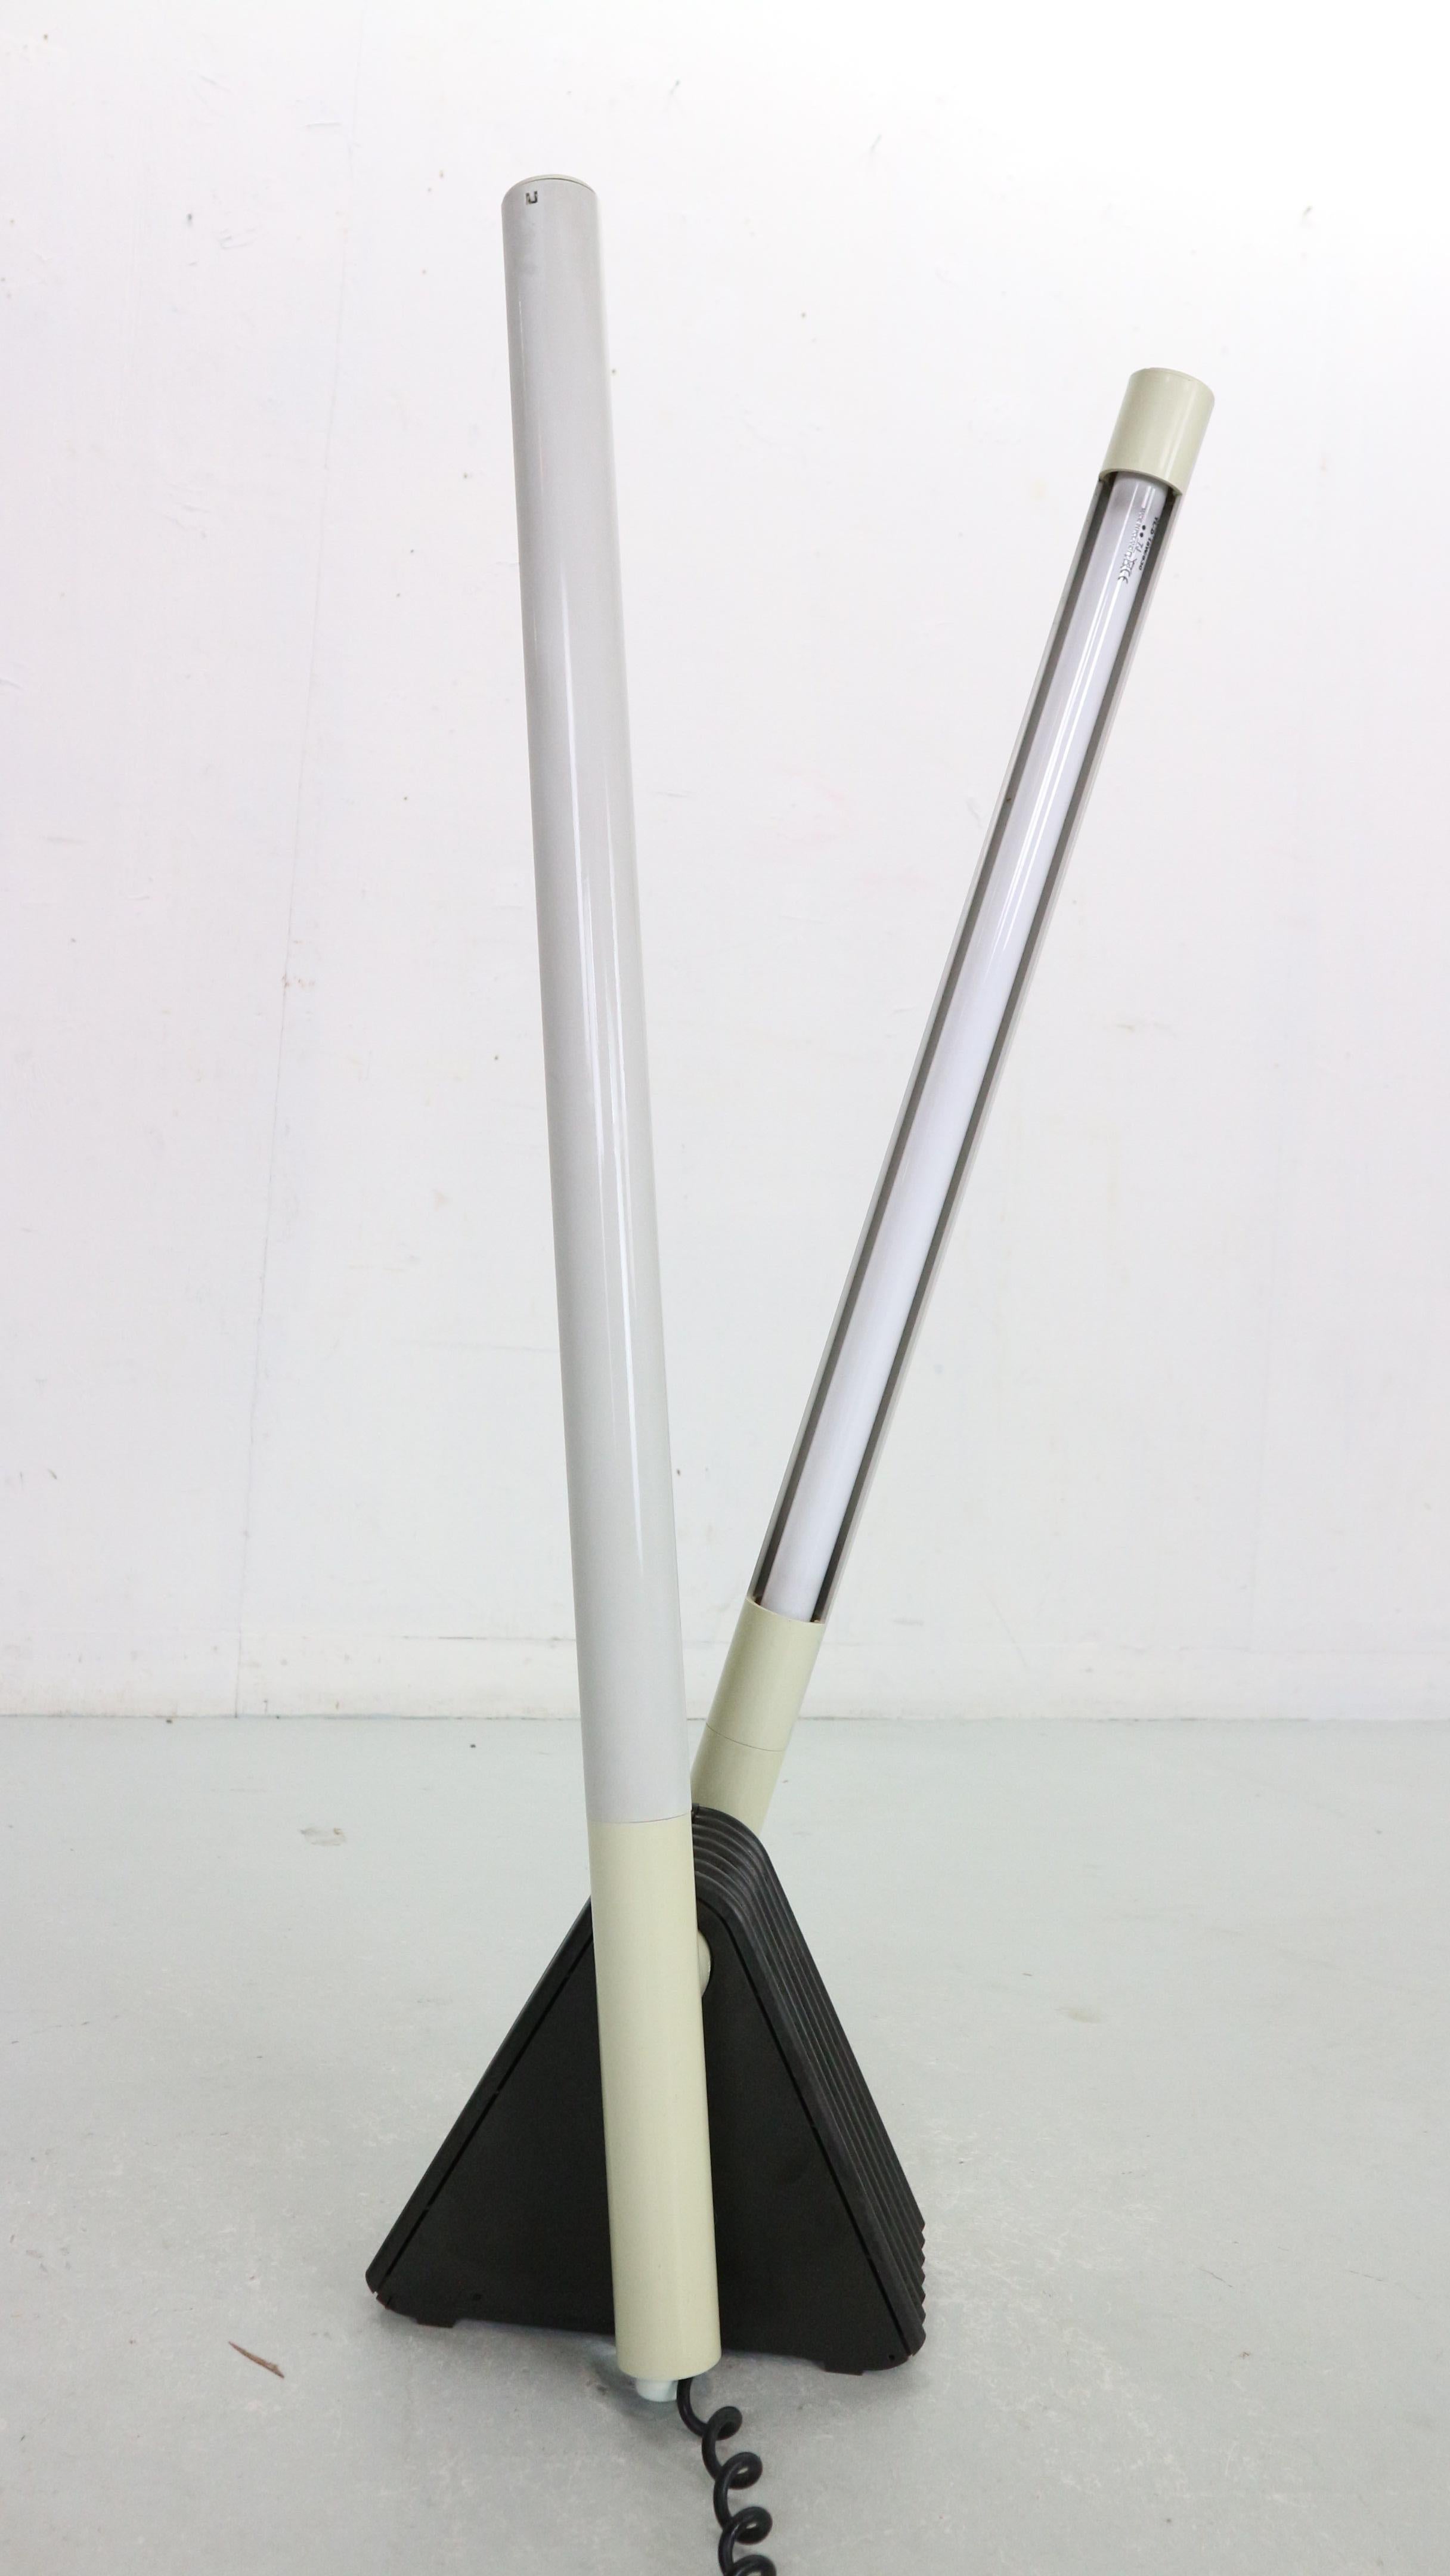 Very nice adjustable Sistema Flu lamp designed by Rodolfo Bonetto for Luci, Italy in 1981. This floor, wall or ceiling lamp has a black triangular base and two gray adjustable arms. The lamp can be placed on a wall, floor or ceiling. The arms can